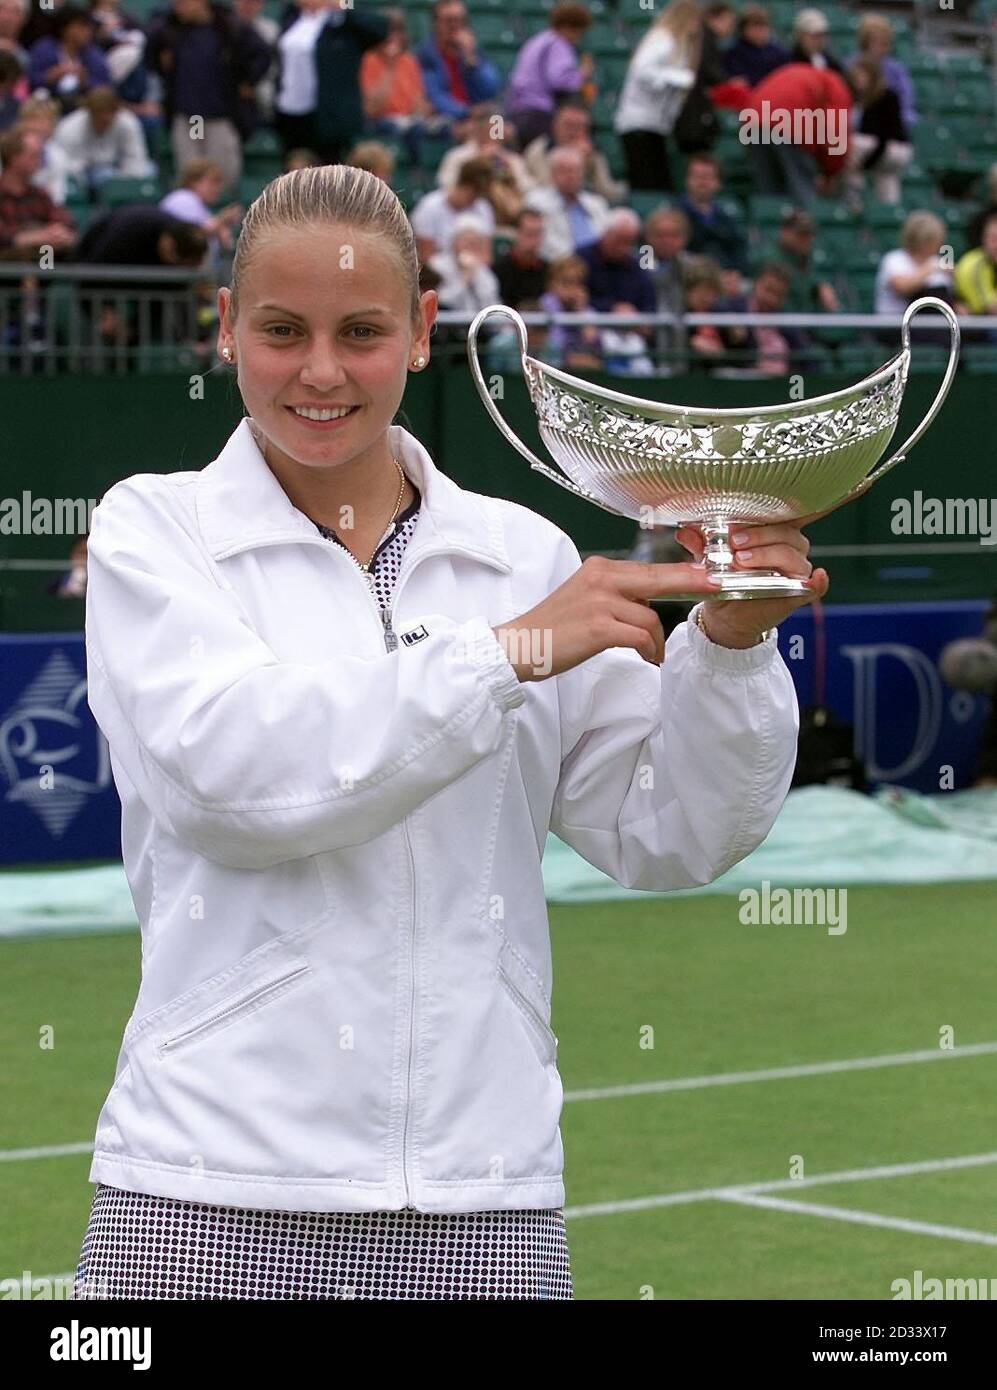 Jelena Dokic of Yugoslavia with the Maude Watson Trophy after her straight sets victory over Anastasia Myskina of Russia at the DFS Classic at the Priory Club, Edgbaston, Birmingham. Stock Photo